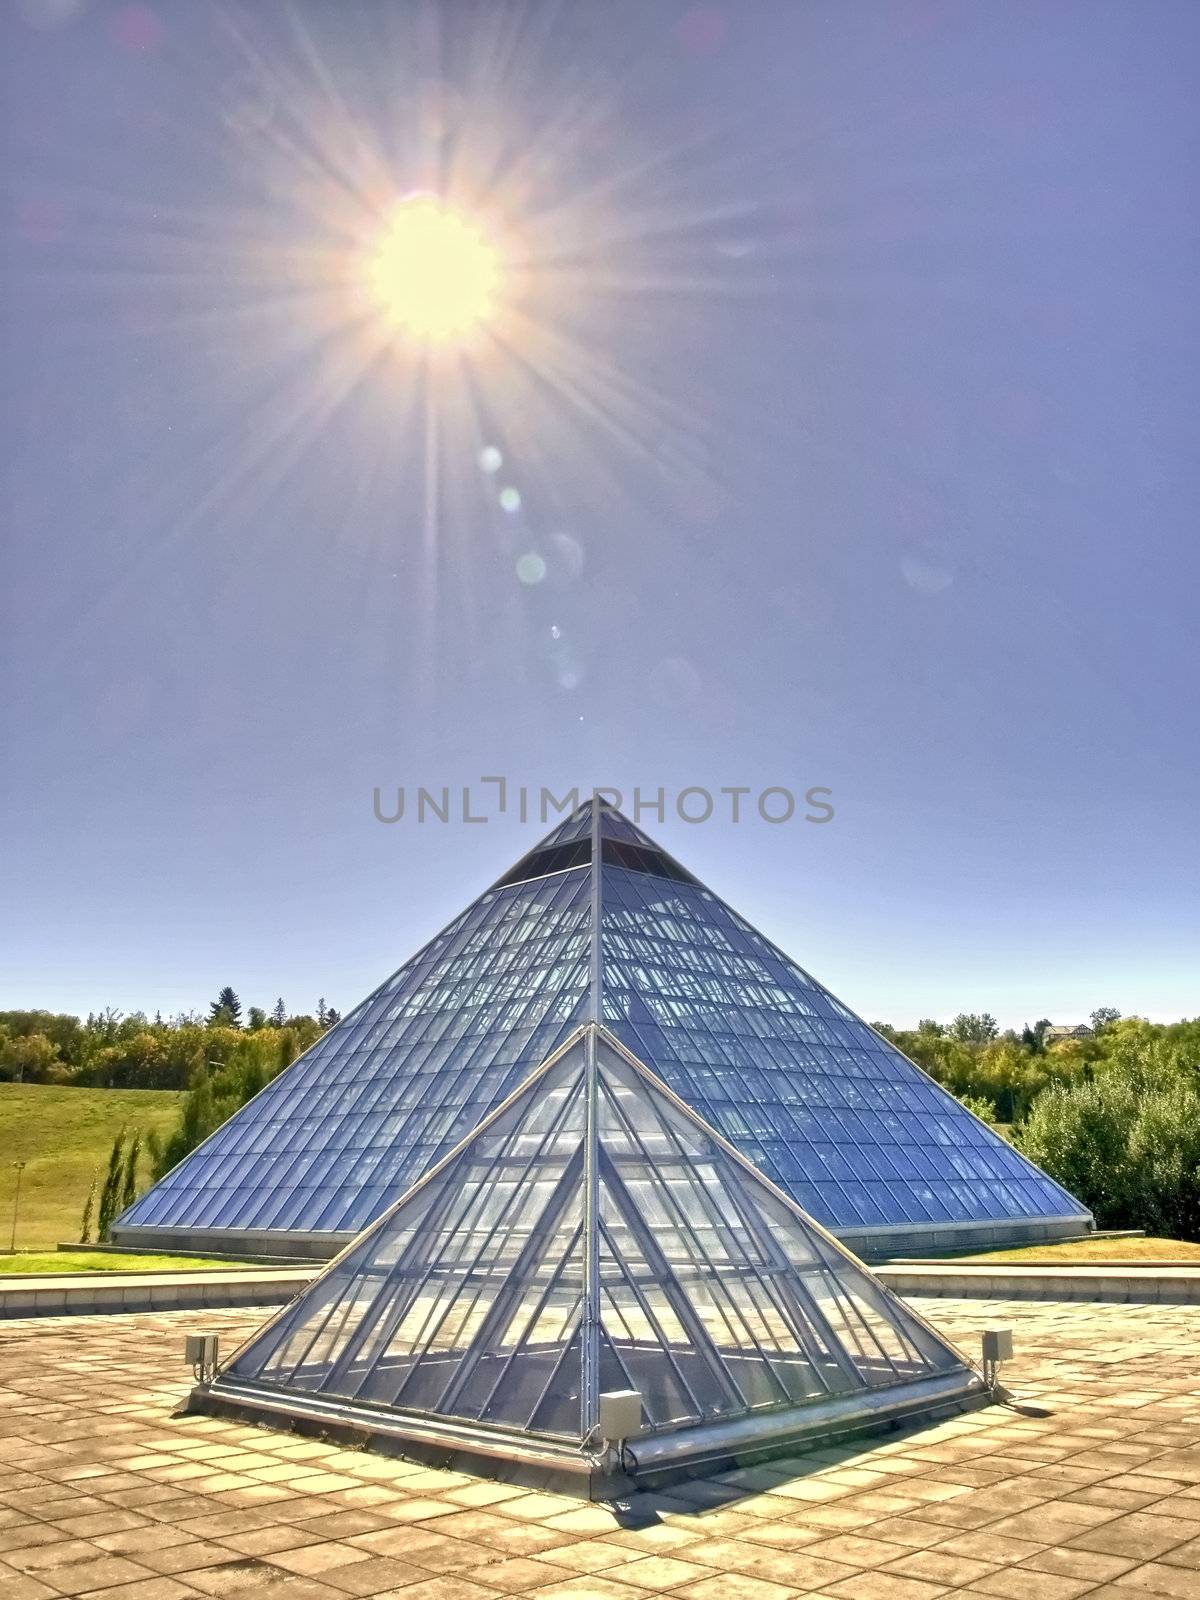 Pyramid conservatory on a bright summer afternoon.